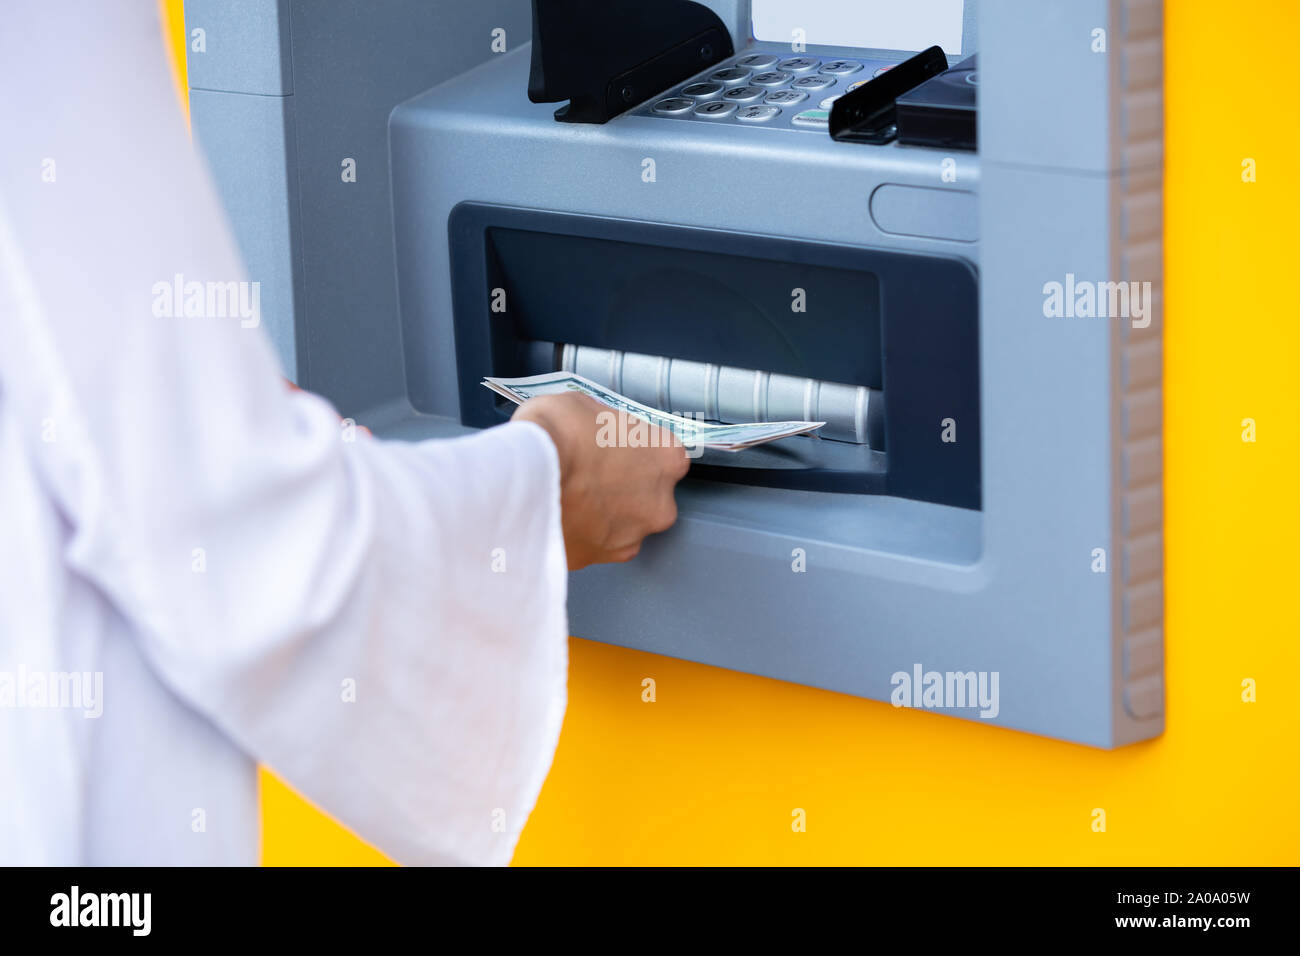 Close-up Of A Woman's Hand Holding Cash Withdraw From Automatic Teller Machine Stock Photo